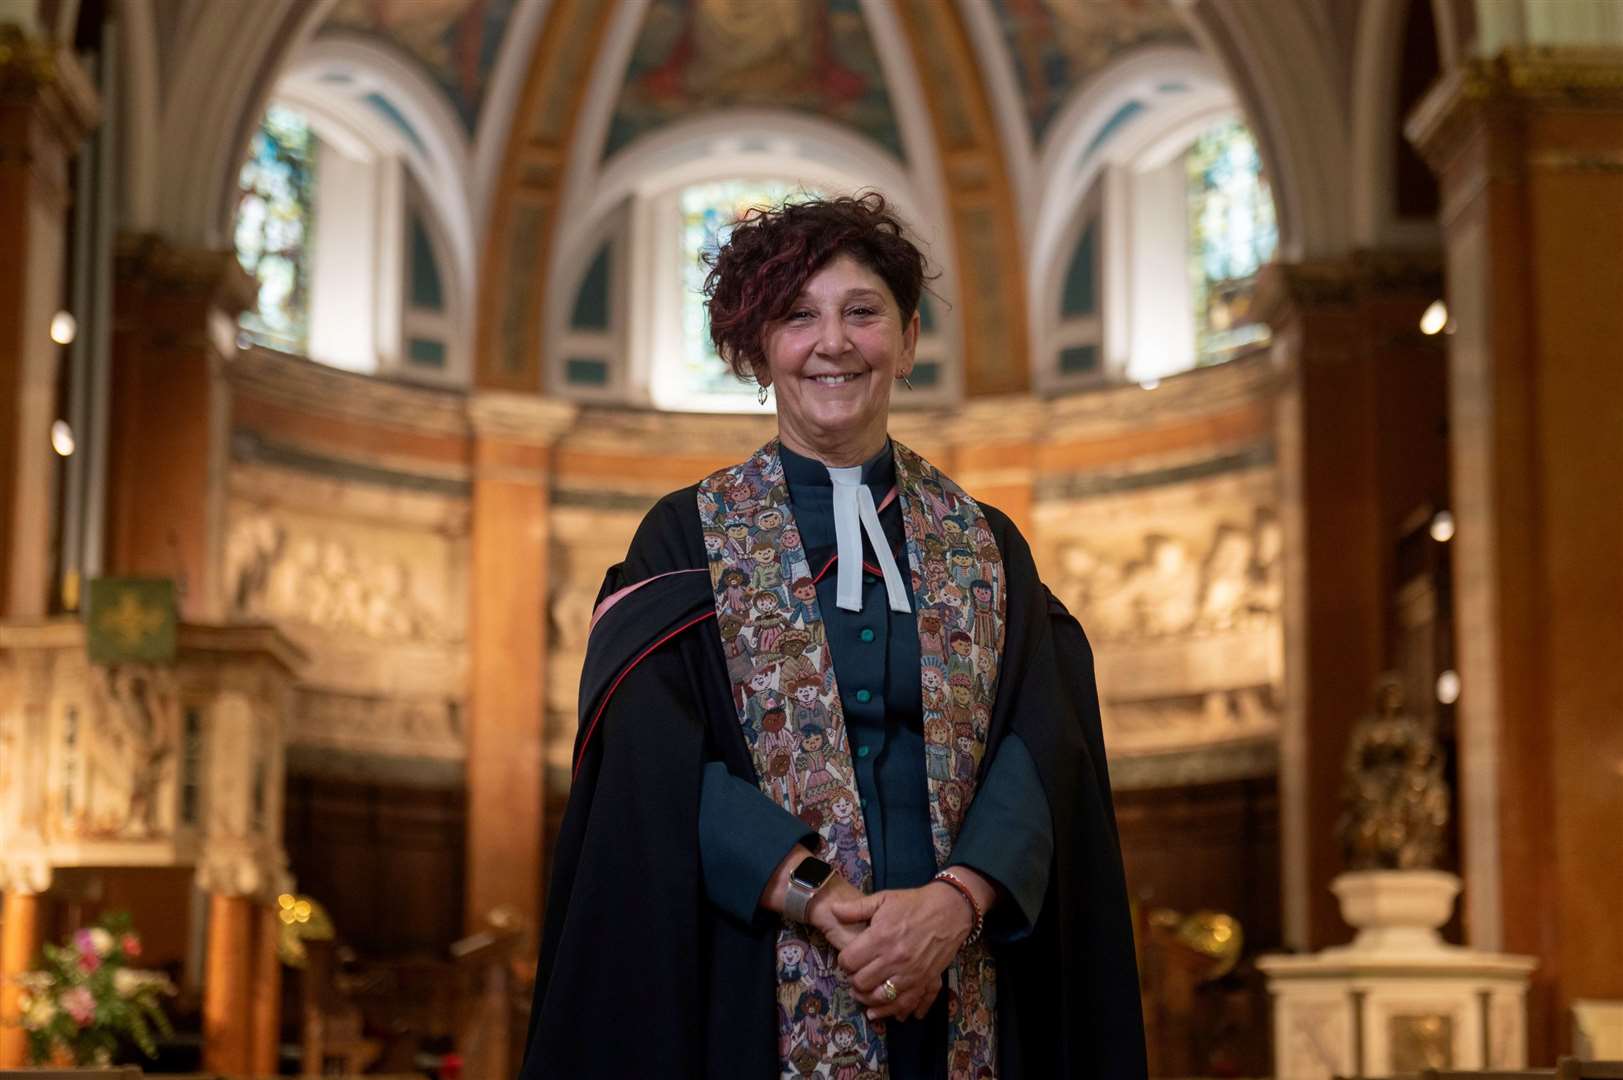 The Moderator of The Church of Scotland the Rt Rev Sally Foster-Fulton.